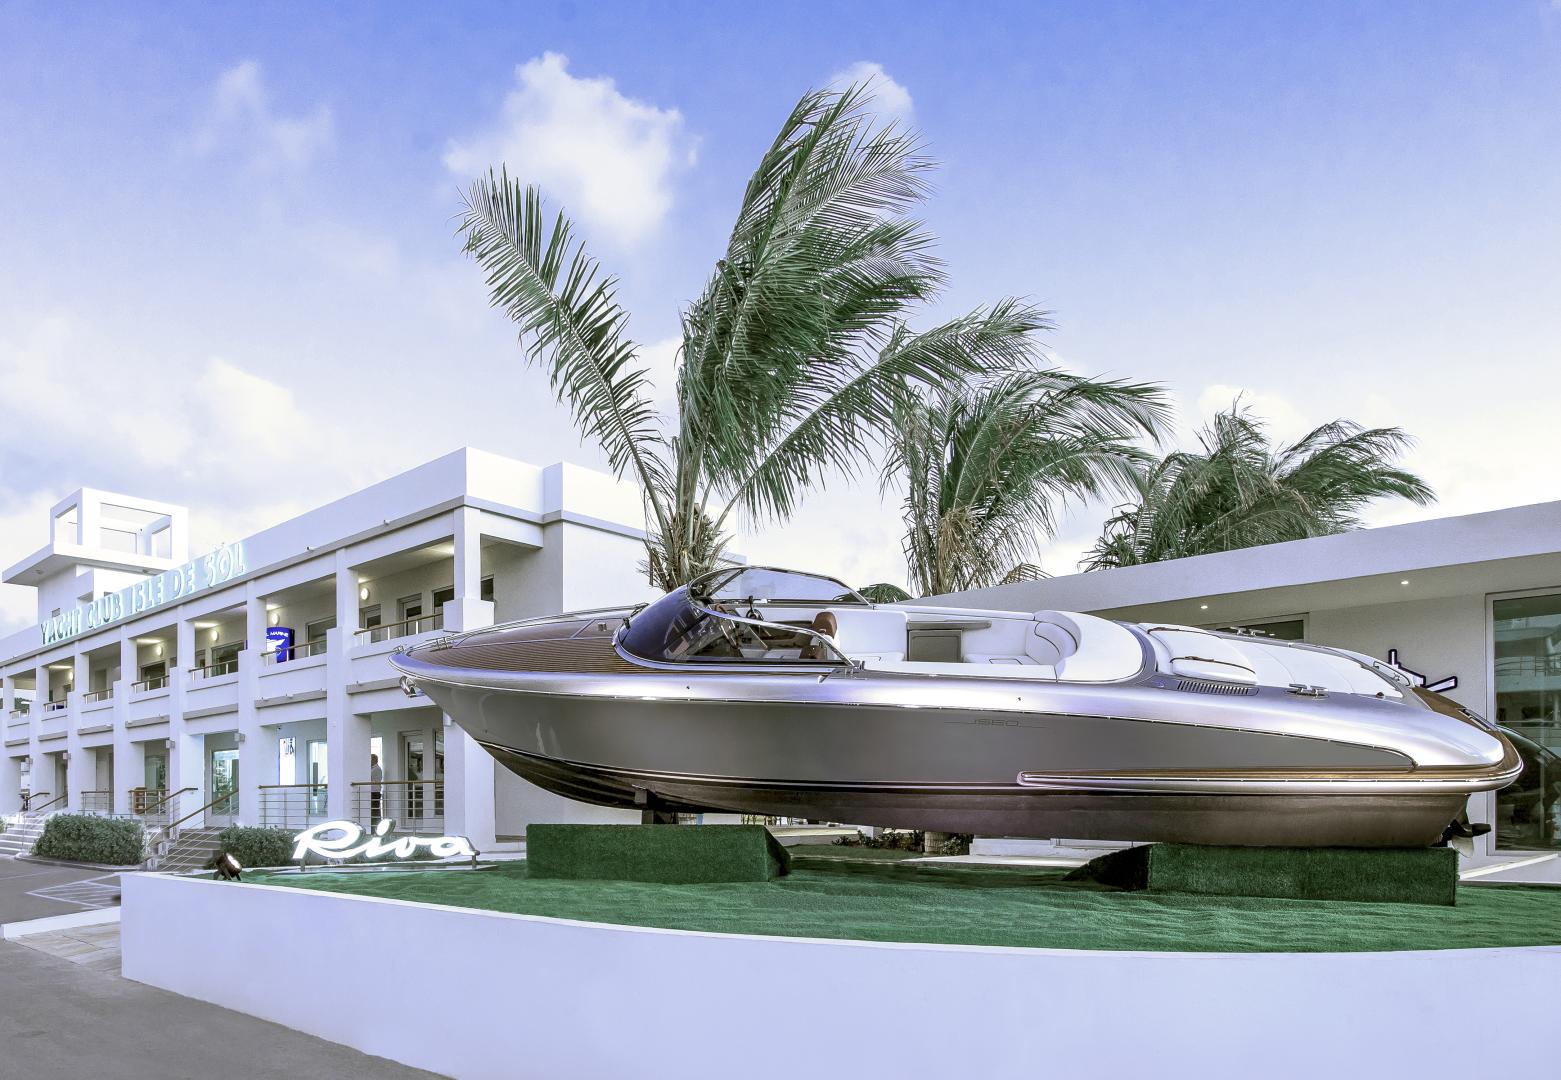 Riva Yachts will showcase its iconic ISEO at Yacht Club Isle de Sol in St. Maarten